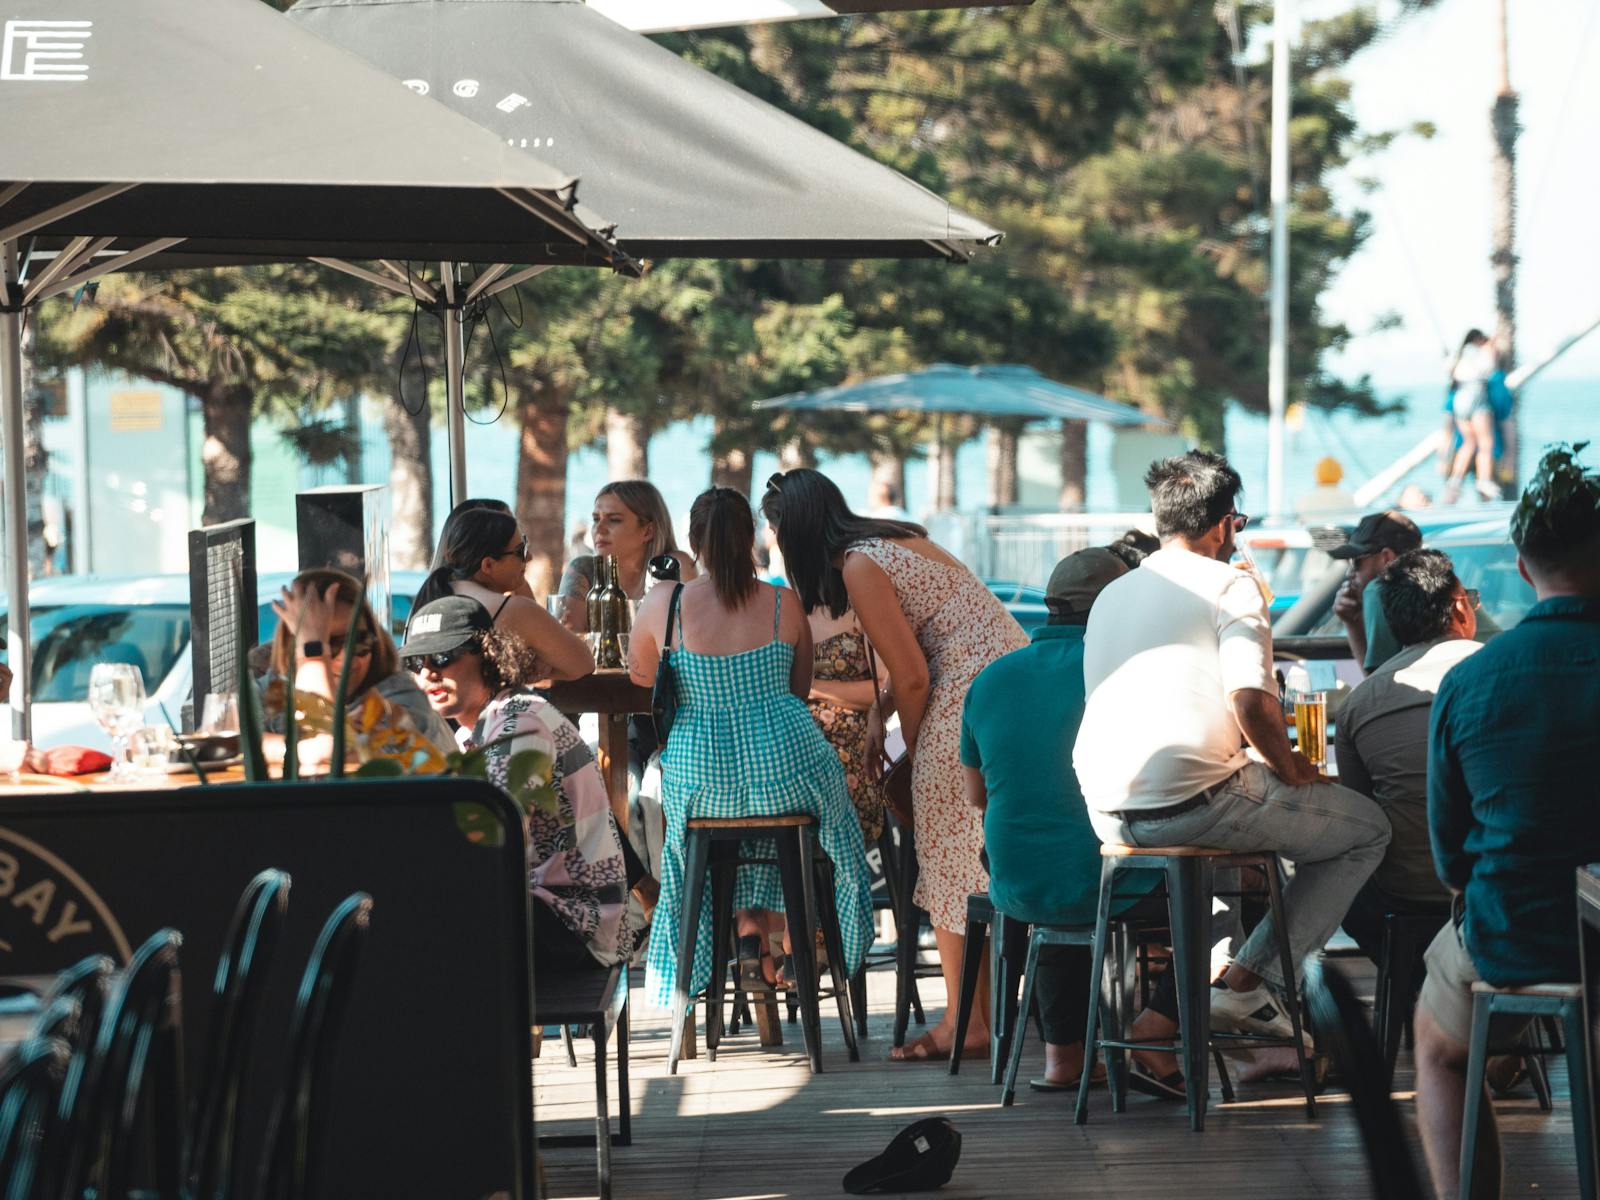 The al fresco dining at Edge Geelong, overlooking Corio Bay and Geelong Waterfront.